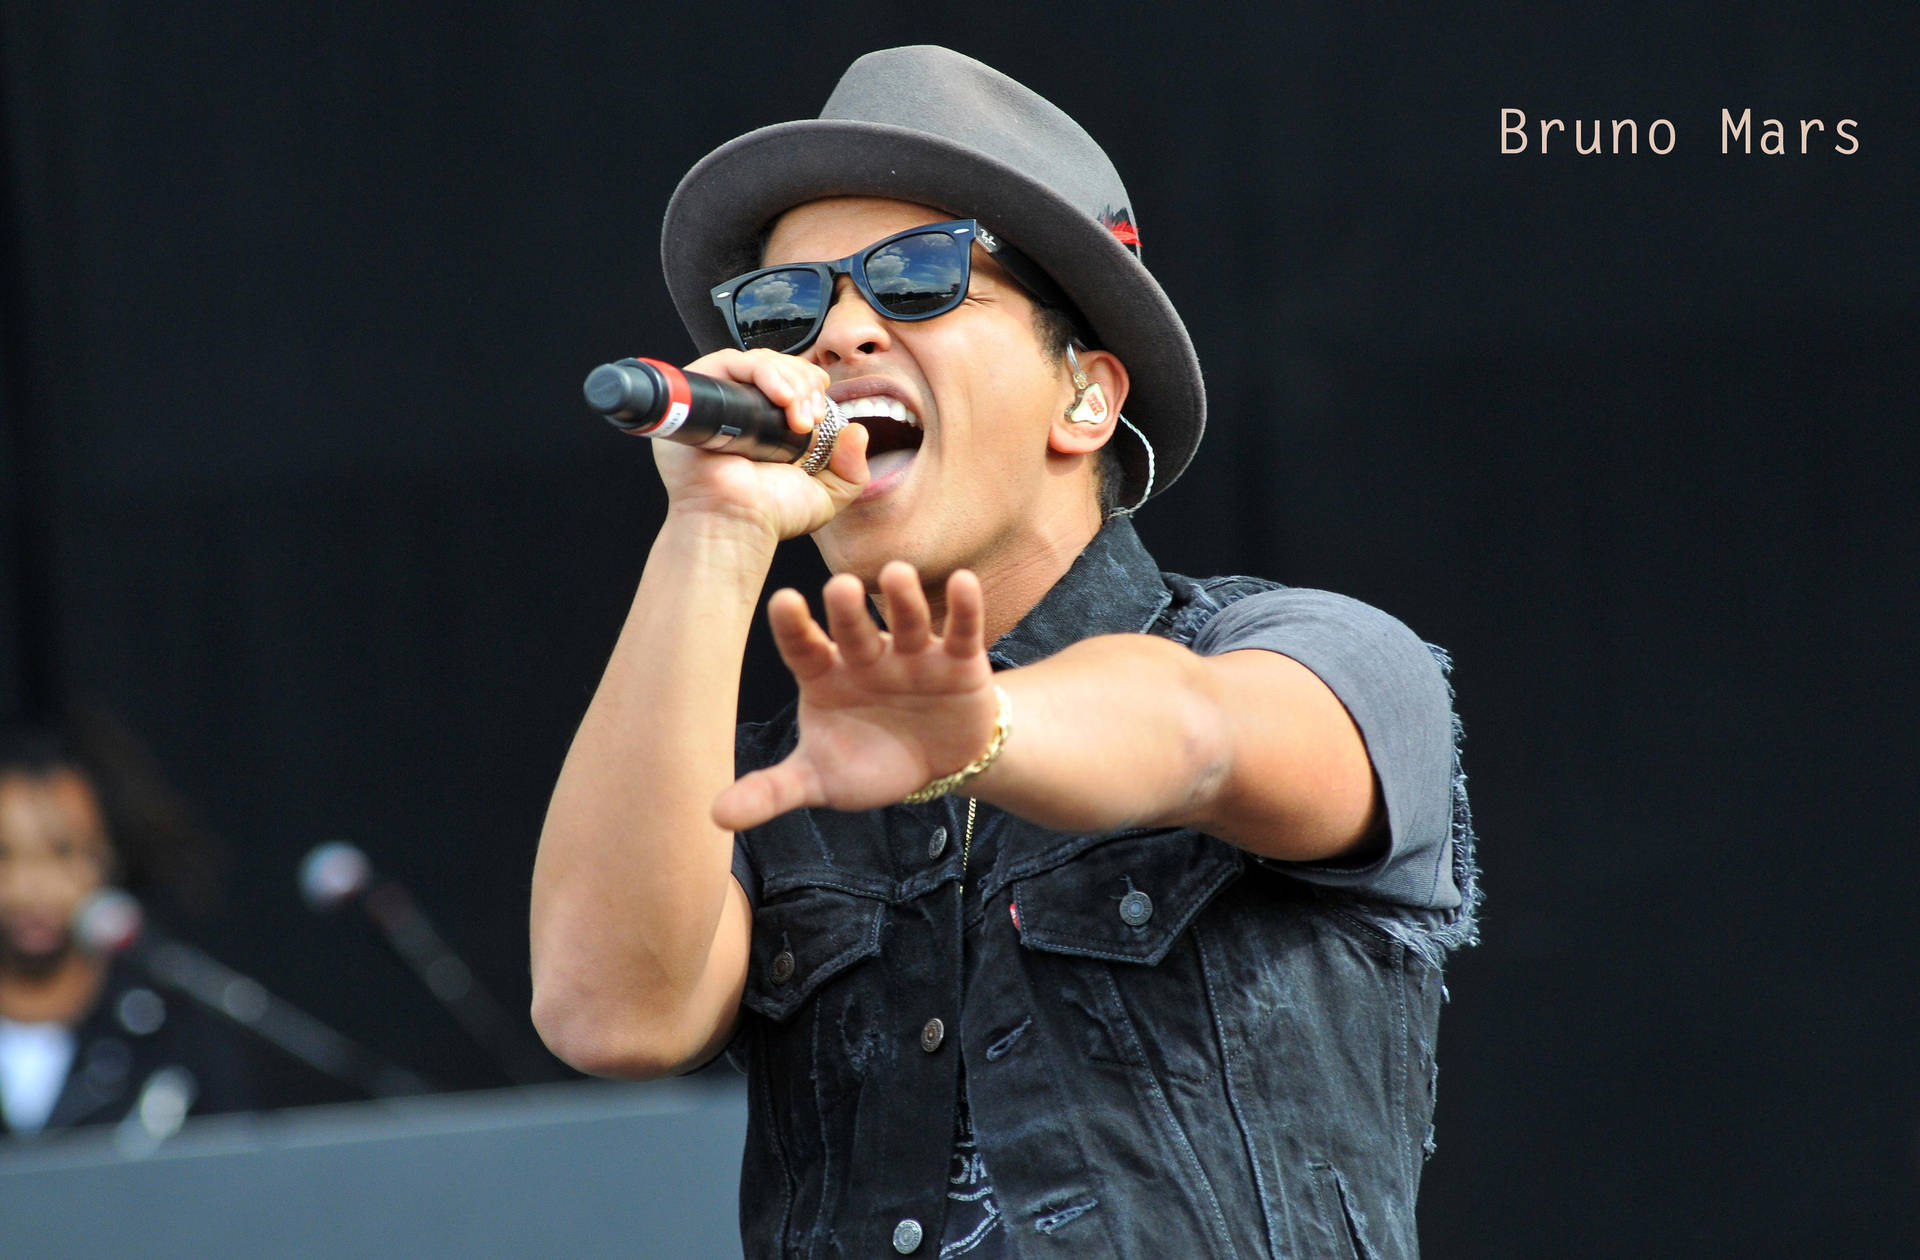 Bruno Mars Performs on Stage Wallpaper